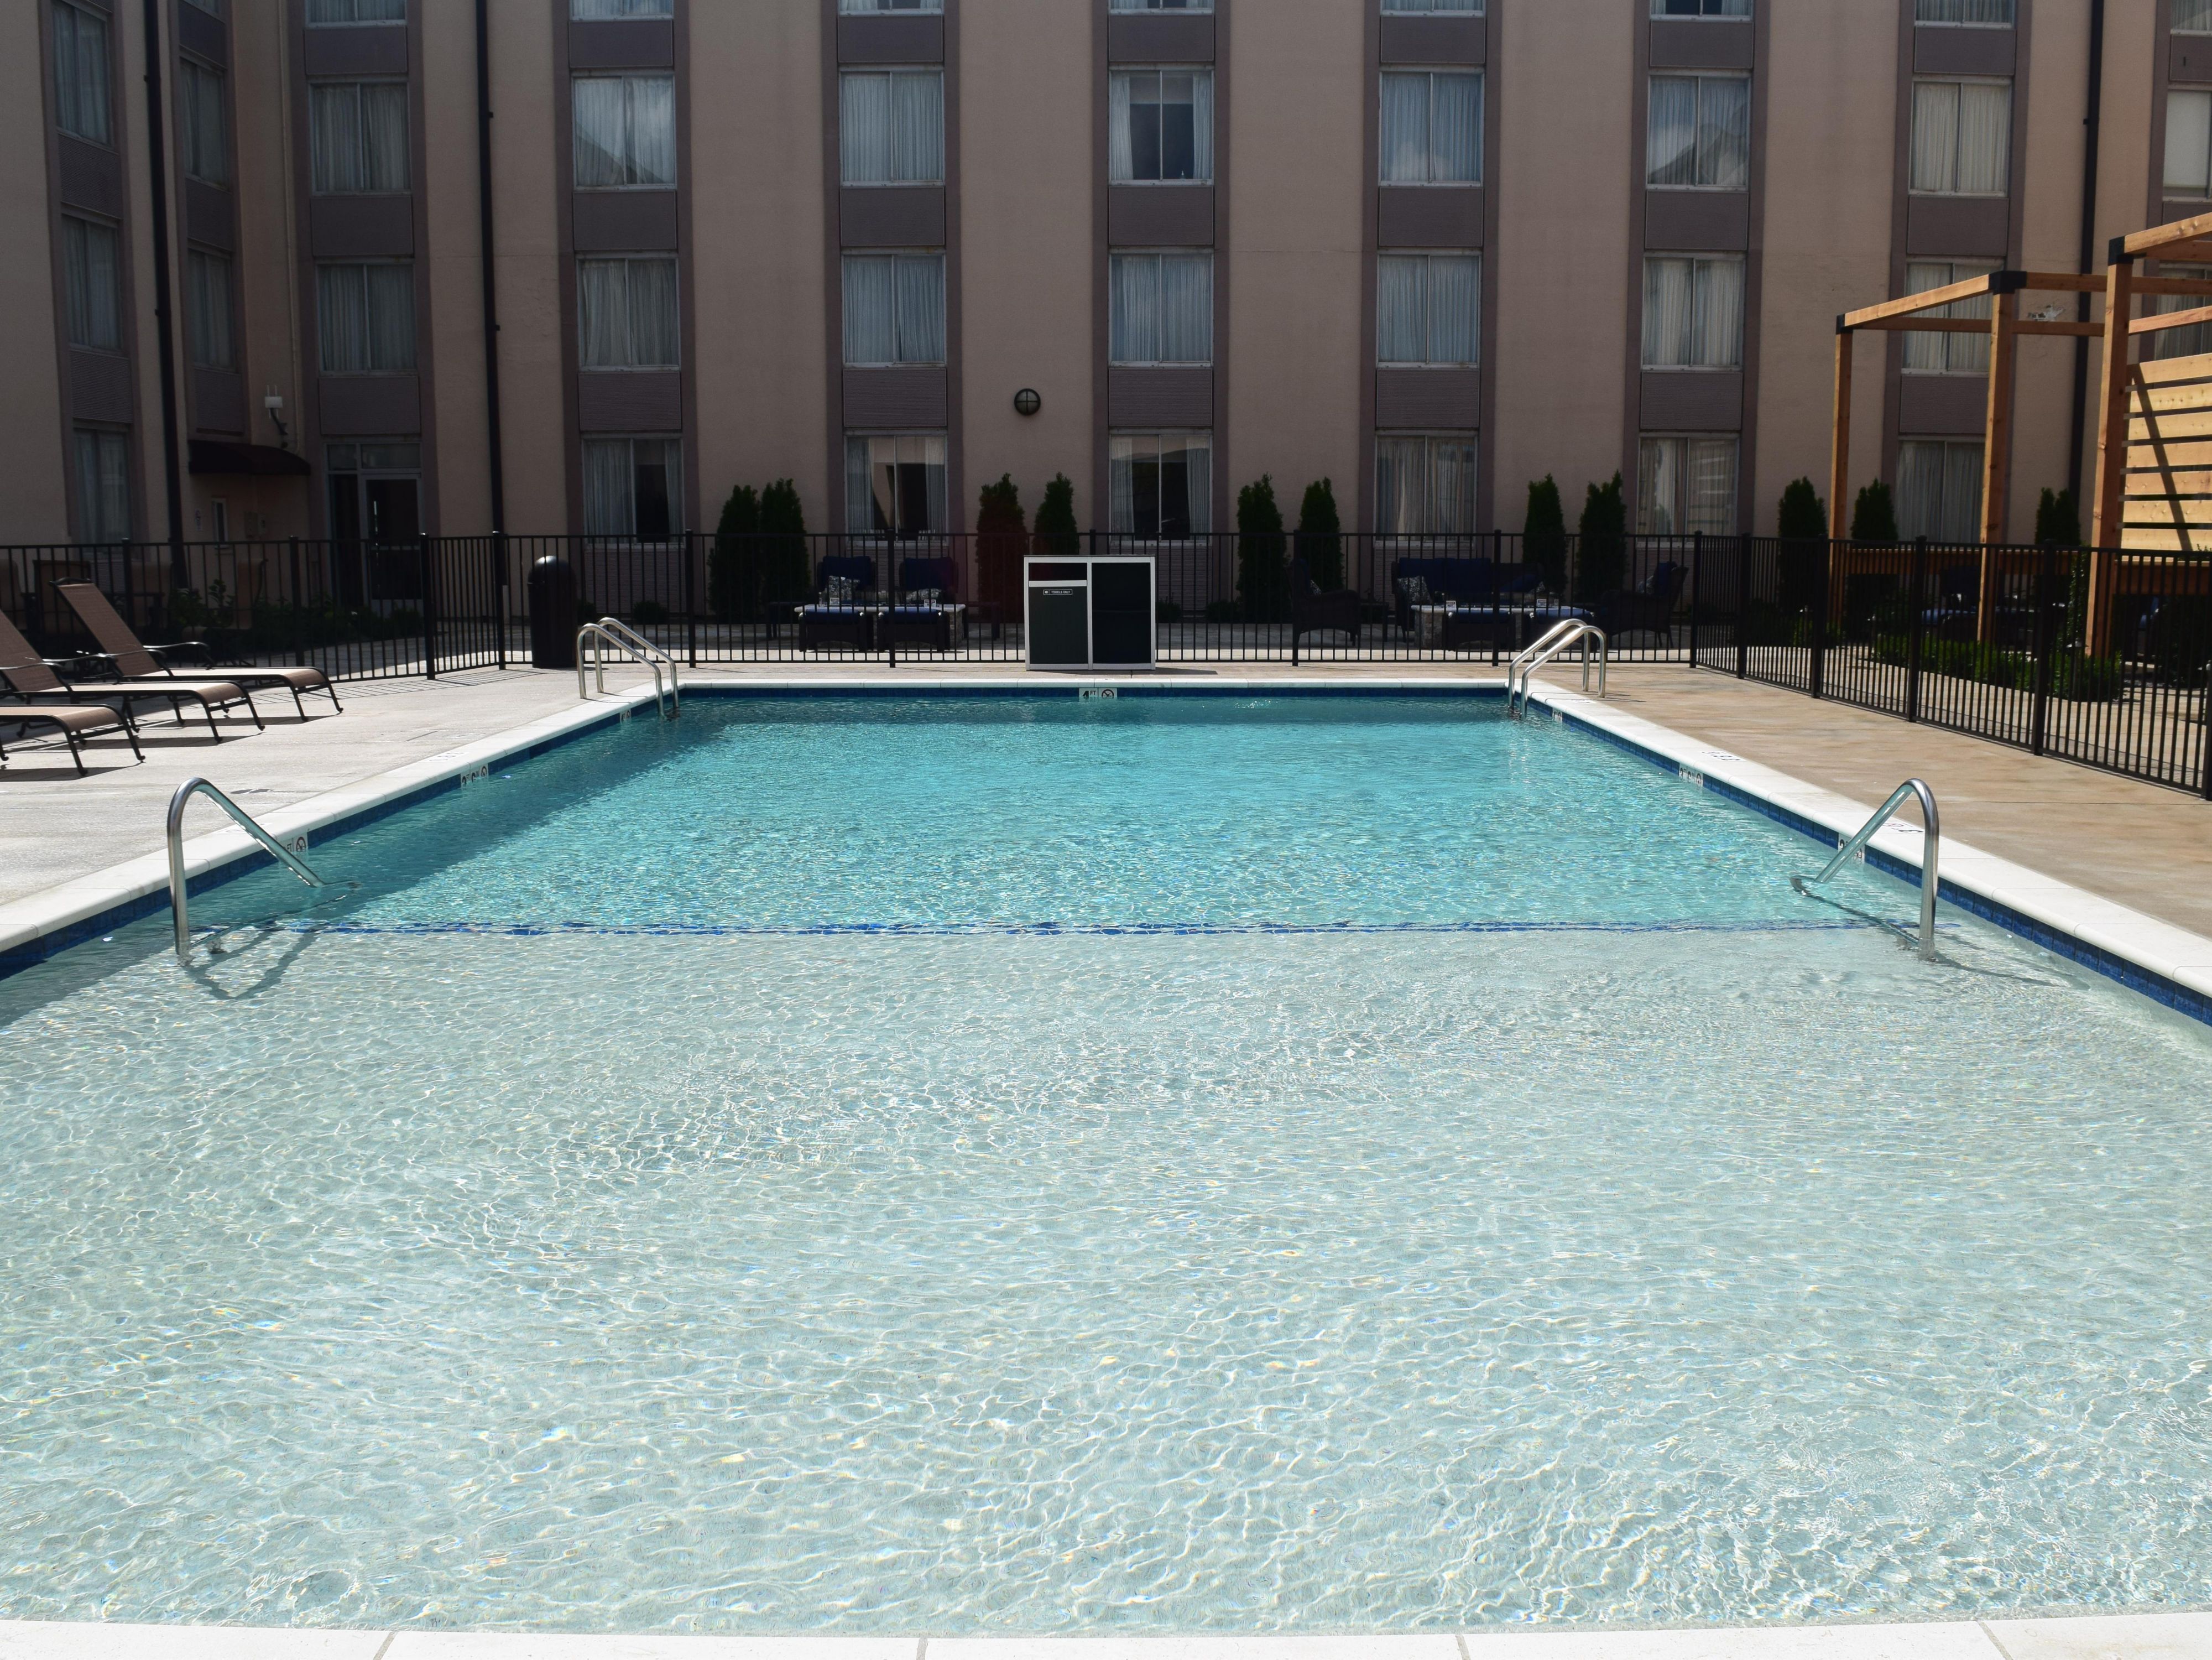 Enjoy some Fun in the Sun at our All New Outdoor Courtyard featuring heated pool, cabanas with outlets & USB ports, firepits with cozy seating and yard games. 